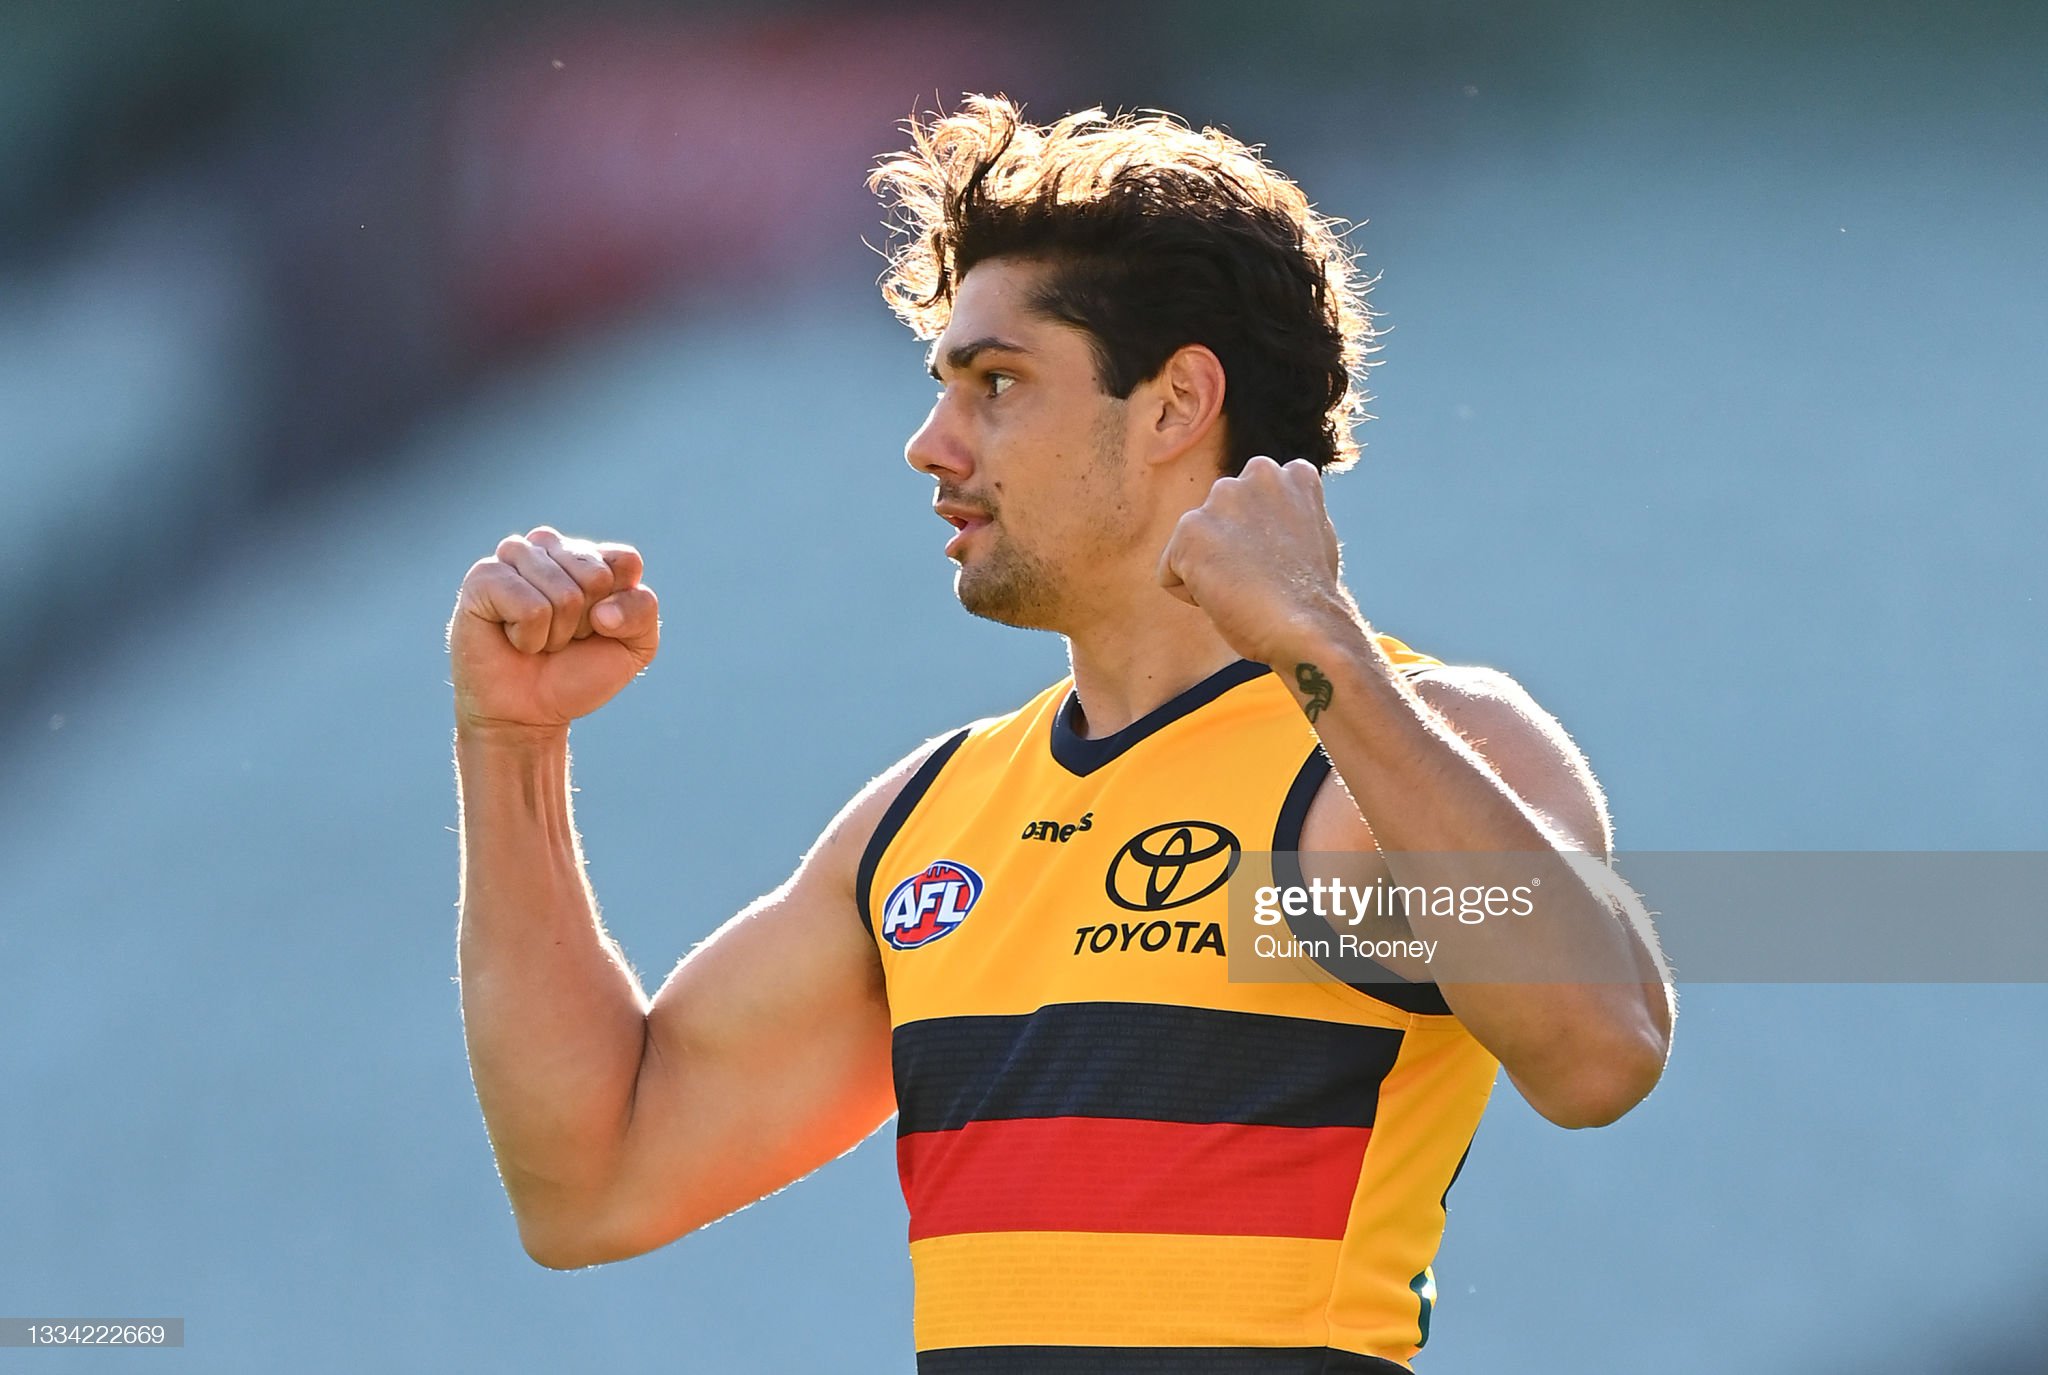 shane-mcadam-of-the-crows-celebrates-kicking-a-goal-during-the-round-picture-id1334222669